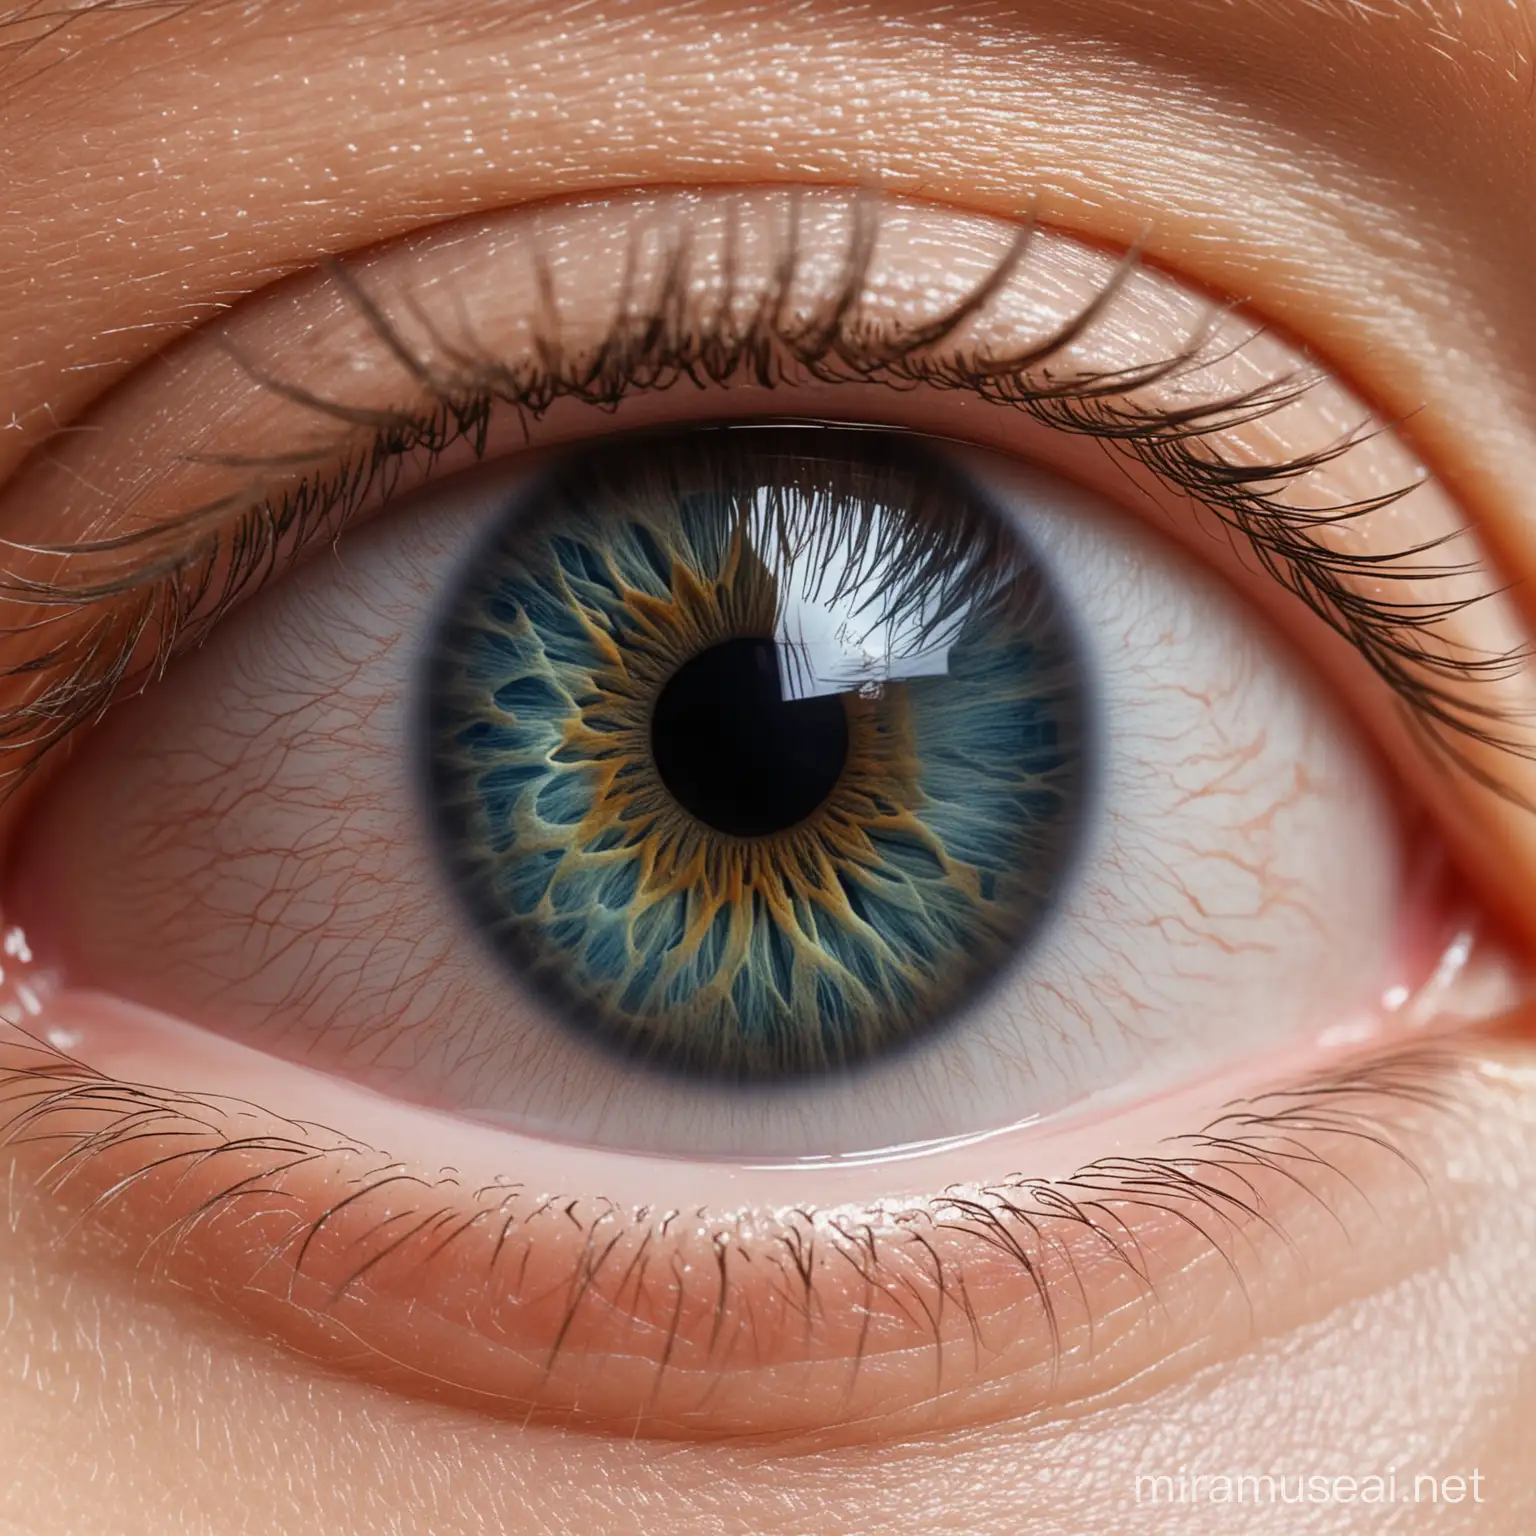 Closeup Human Eye with Vibrant Iris Colors and Intricate Details